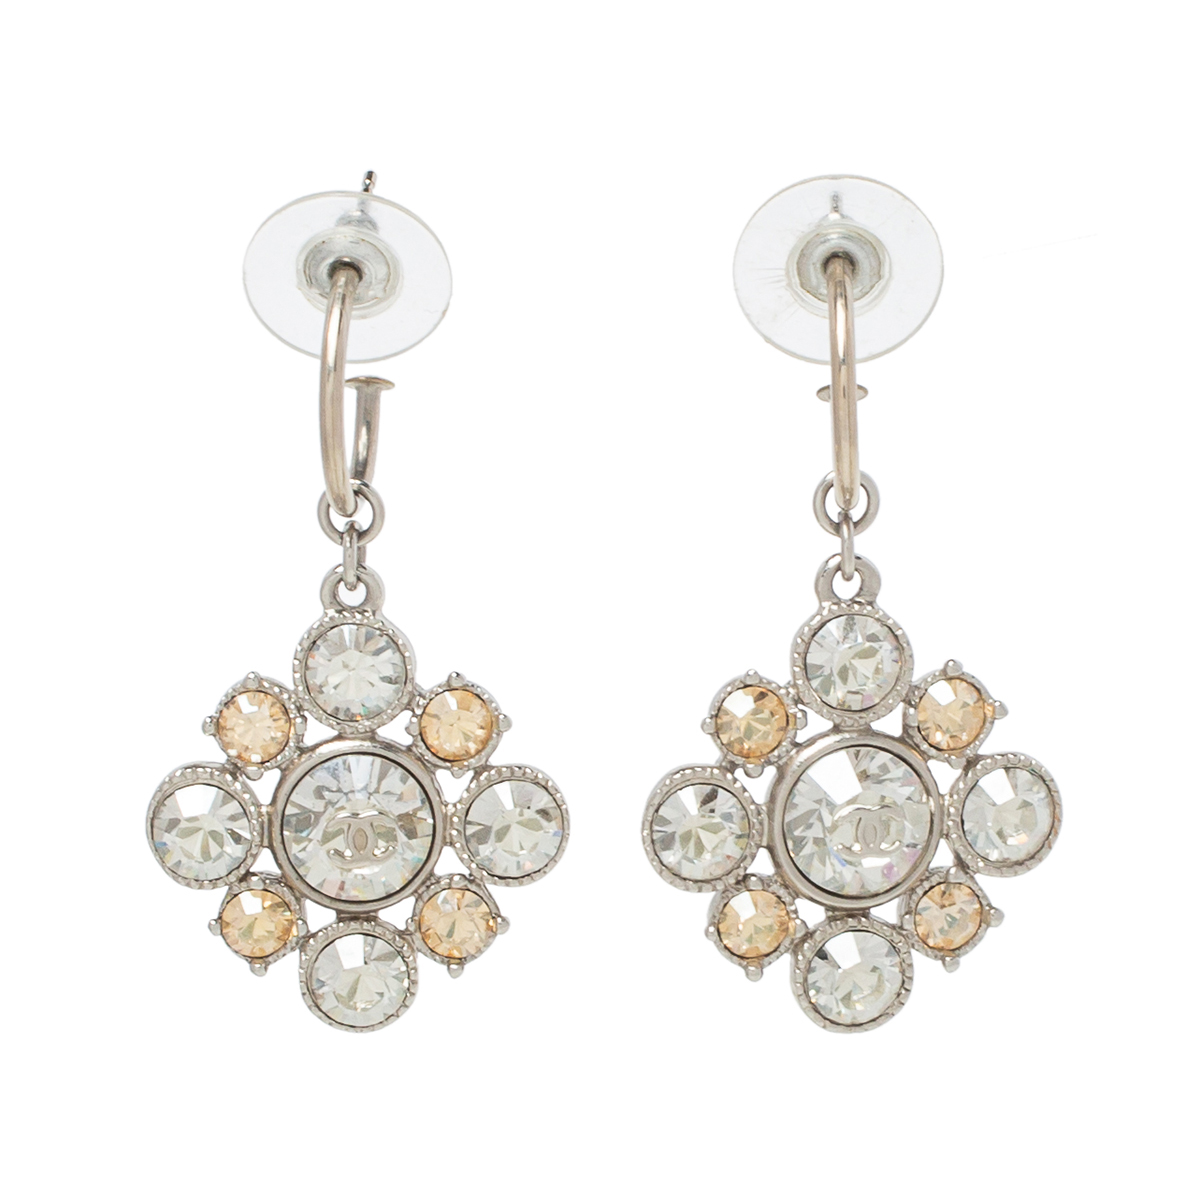 Chanel CC Floral Crystal Silver Tone Drop Earrings